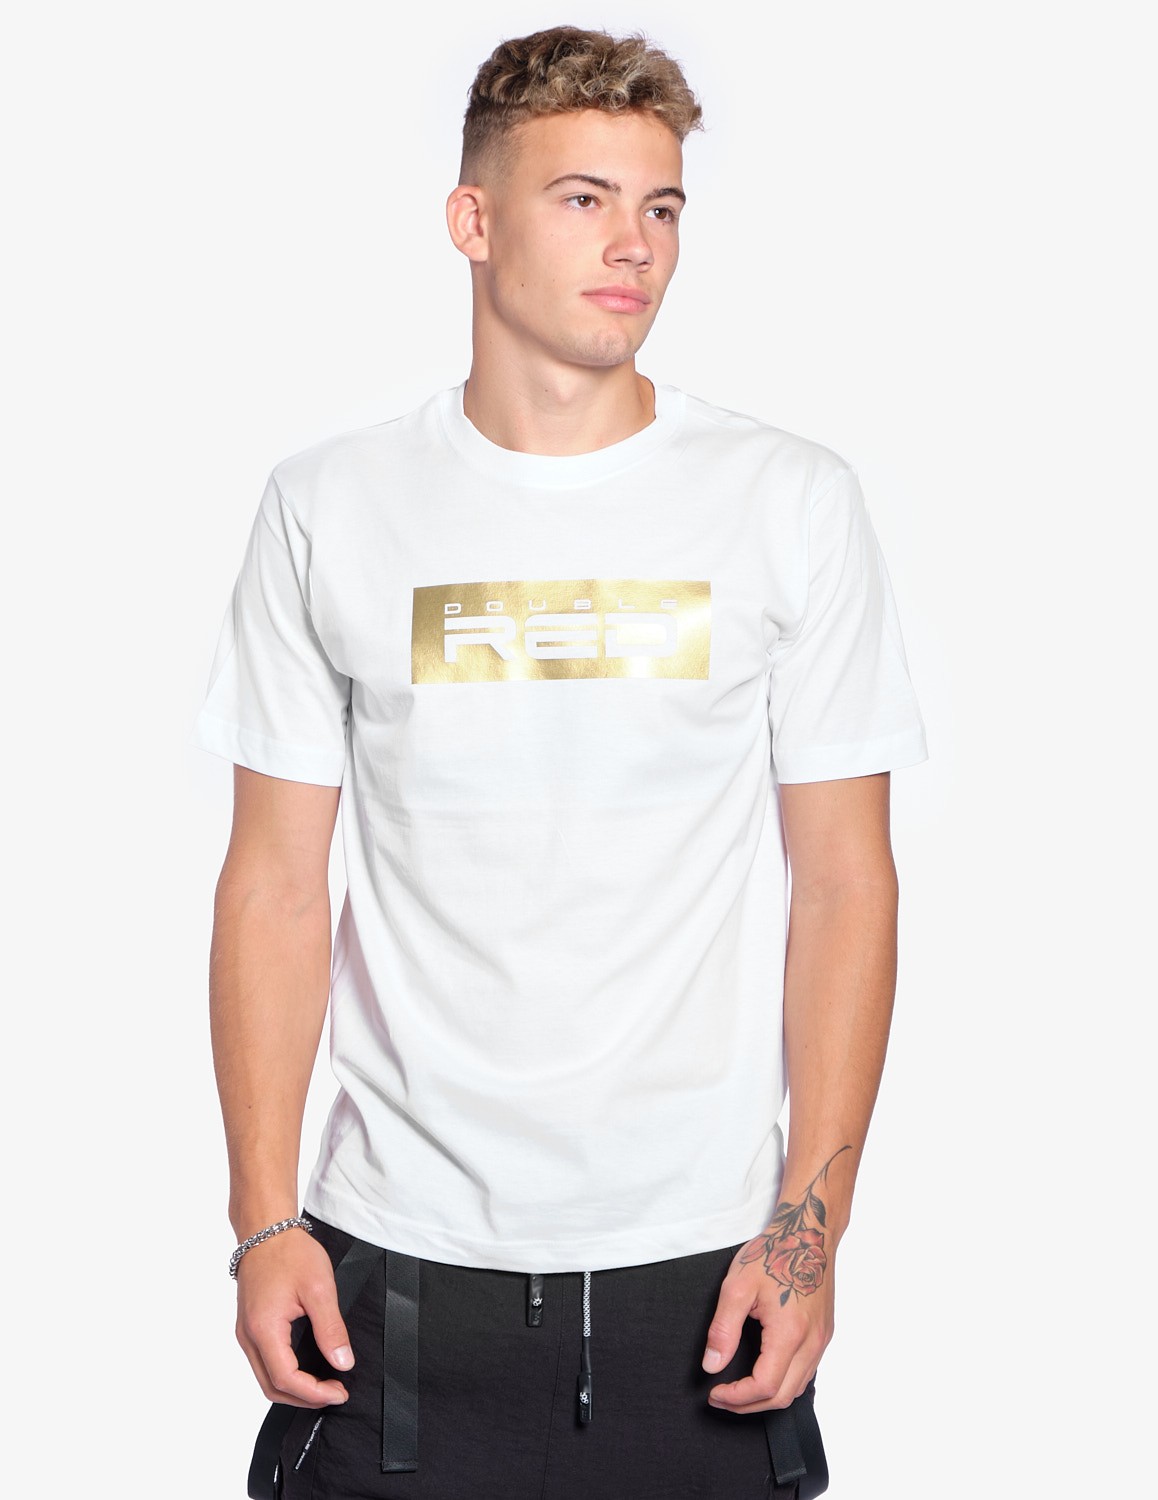 T-shirt GOLD Edition White